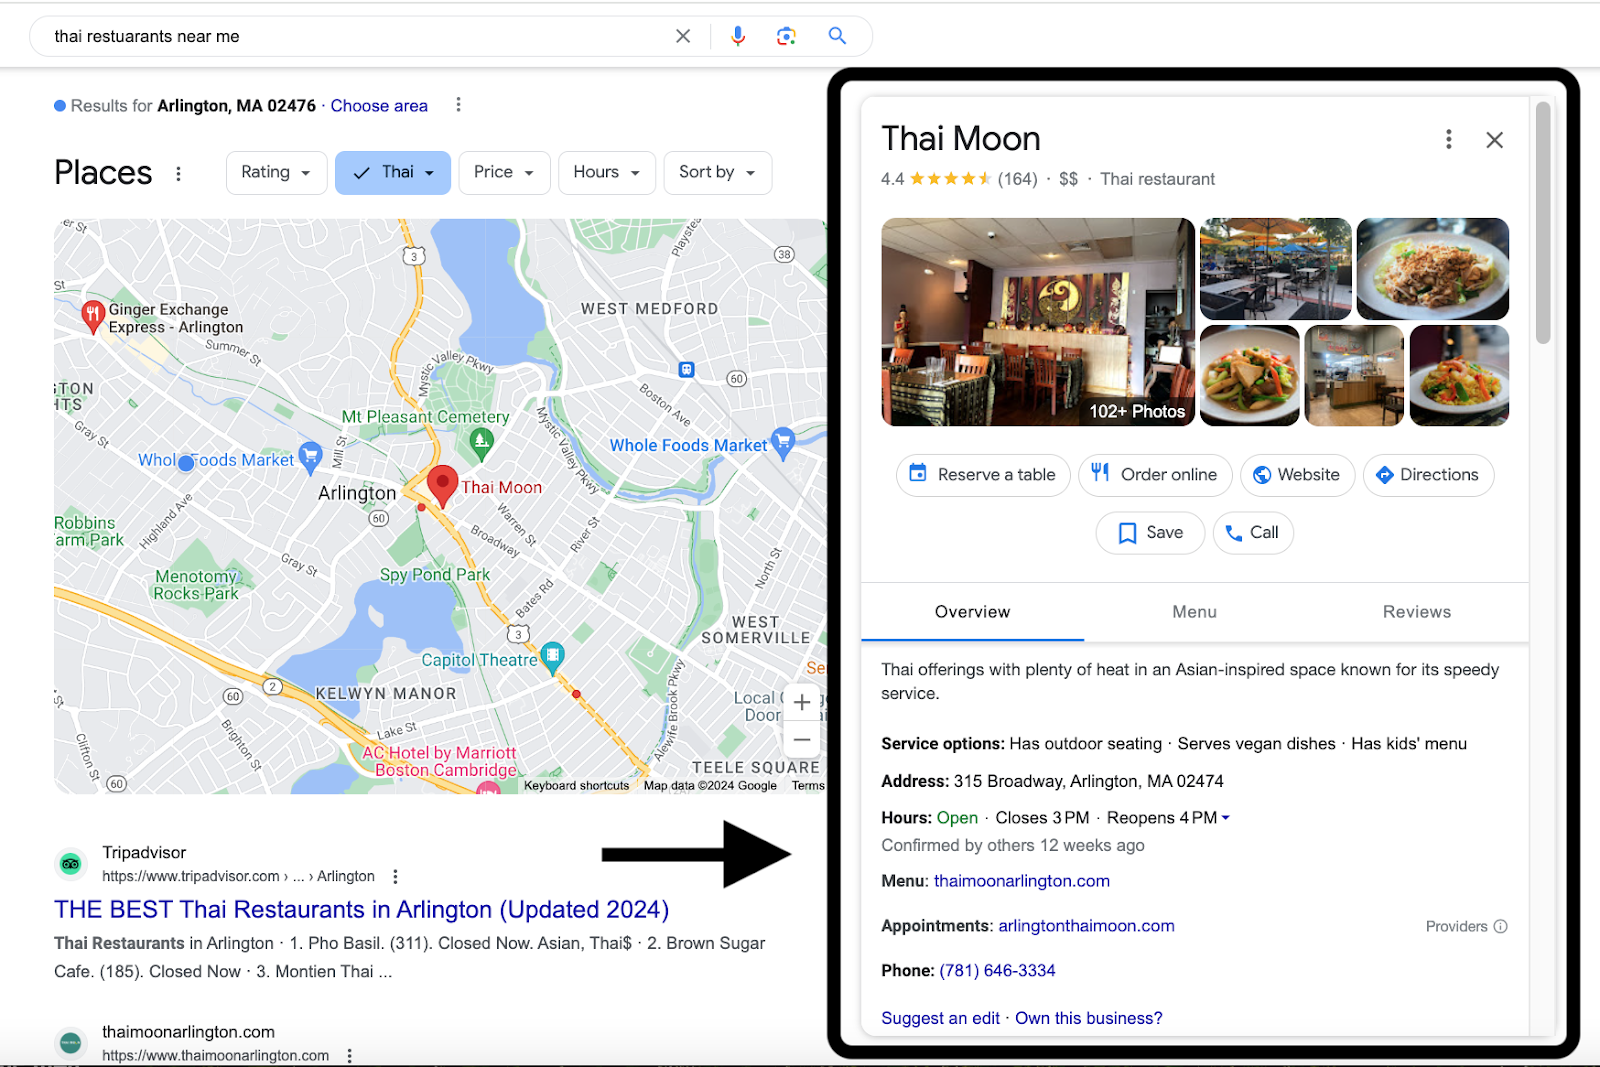 Thai Moon Google Business Profile in a "near me"  local SEO search result